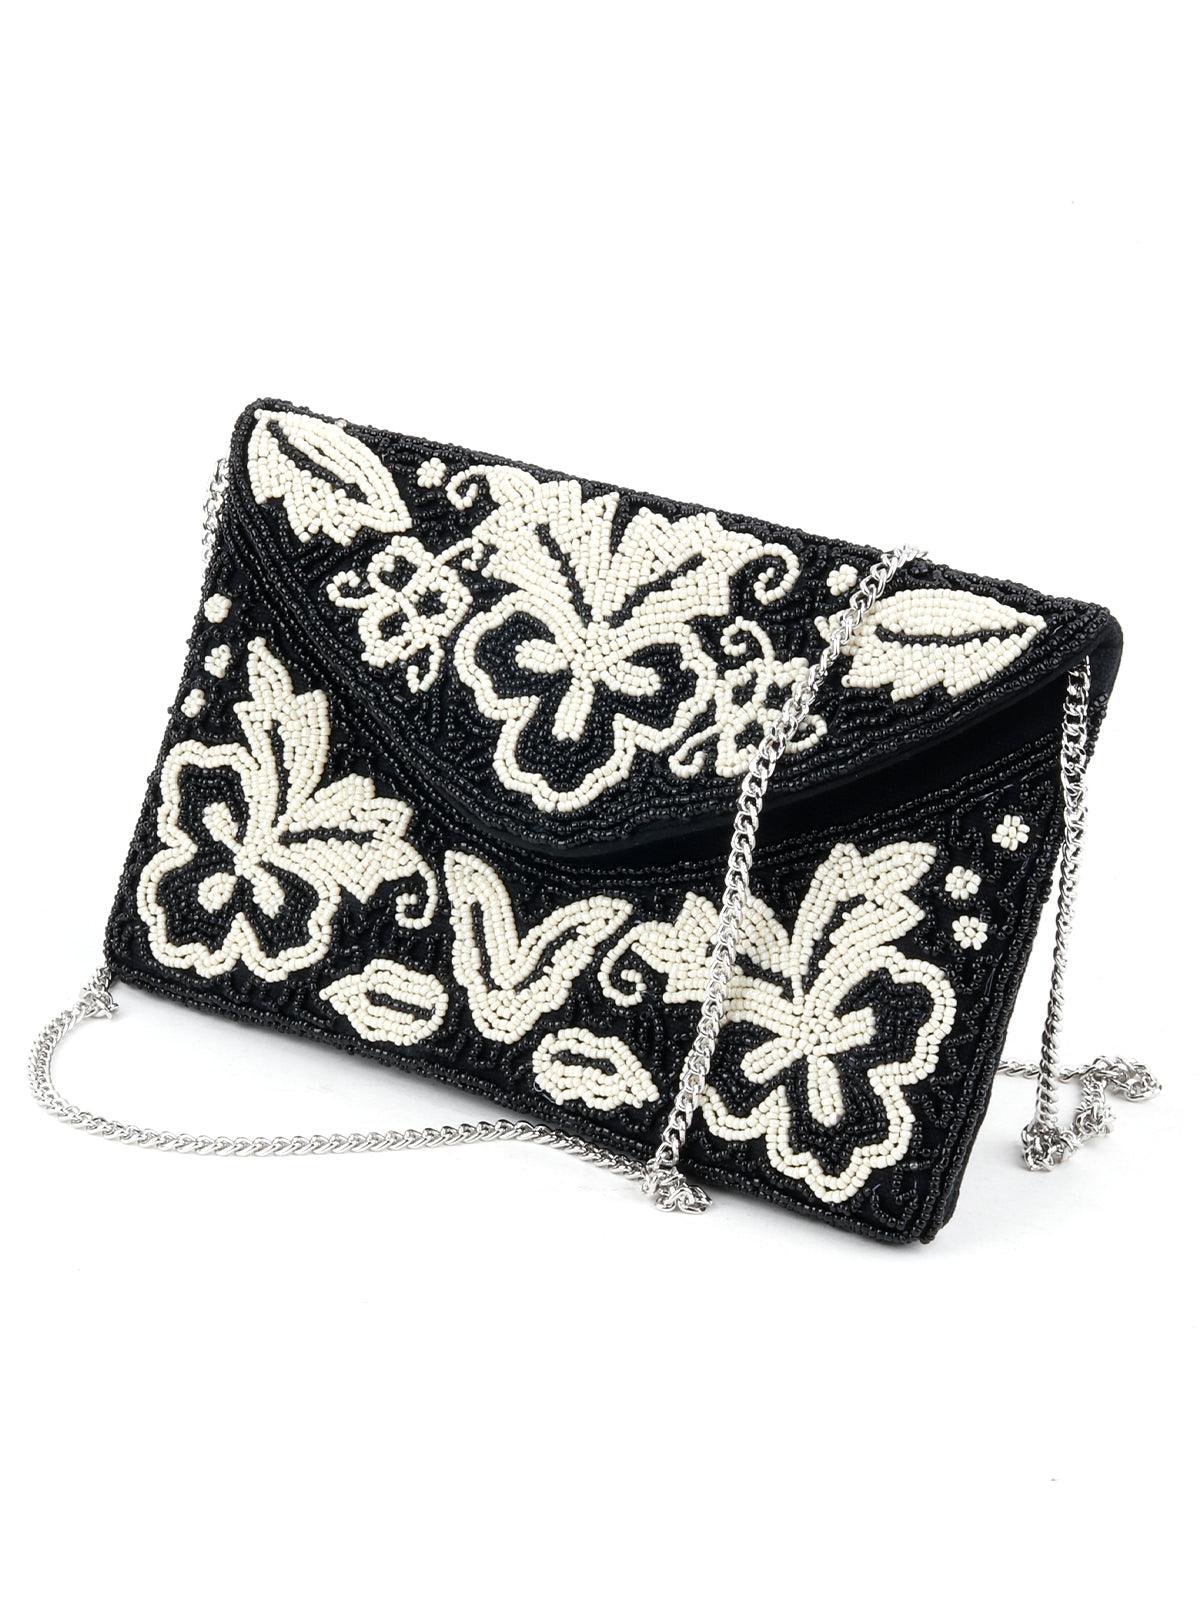 Black And White Beads Envelope Clutch - Odette